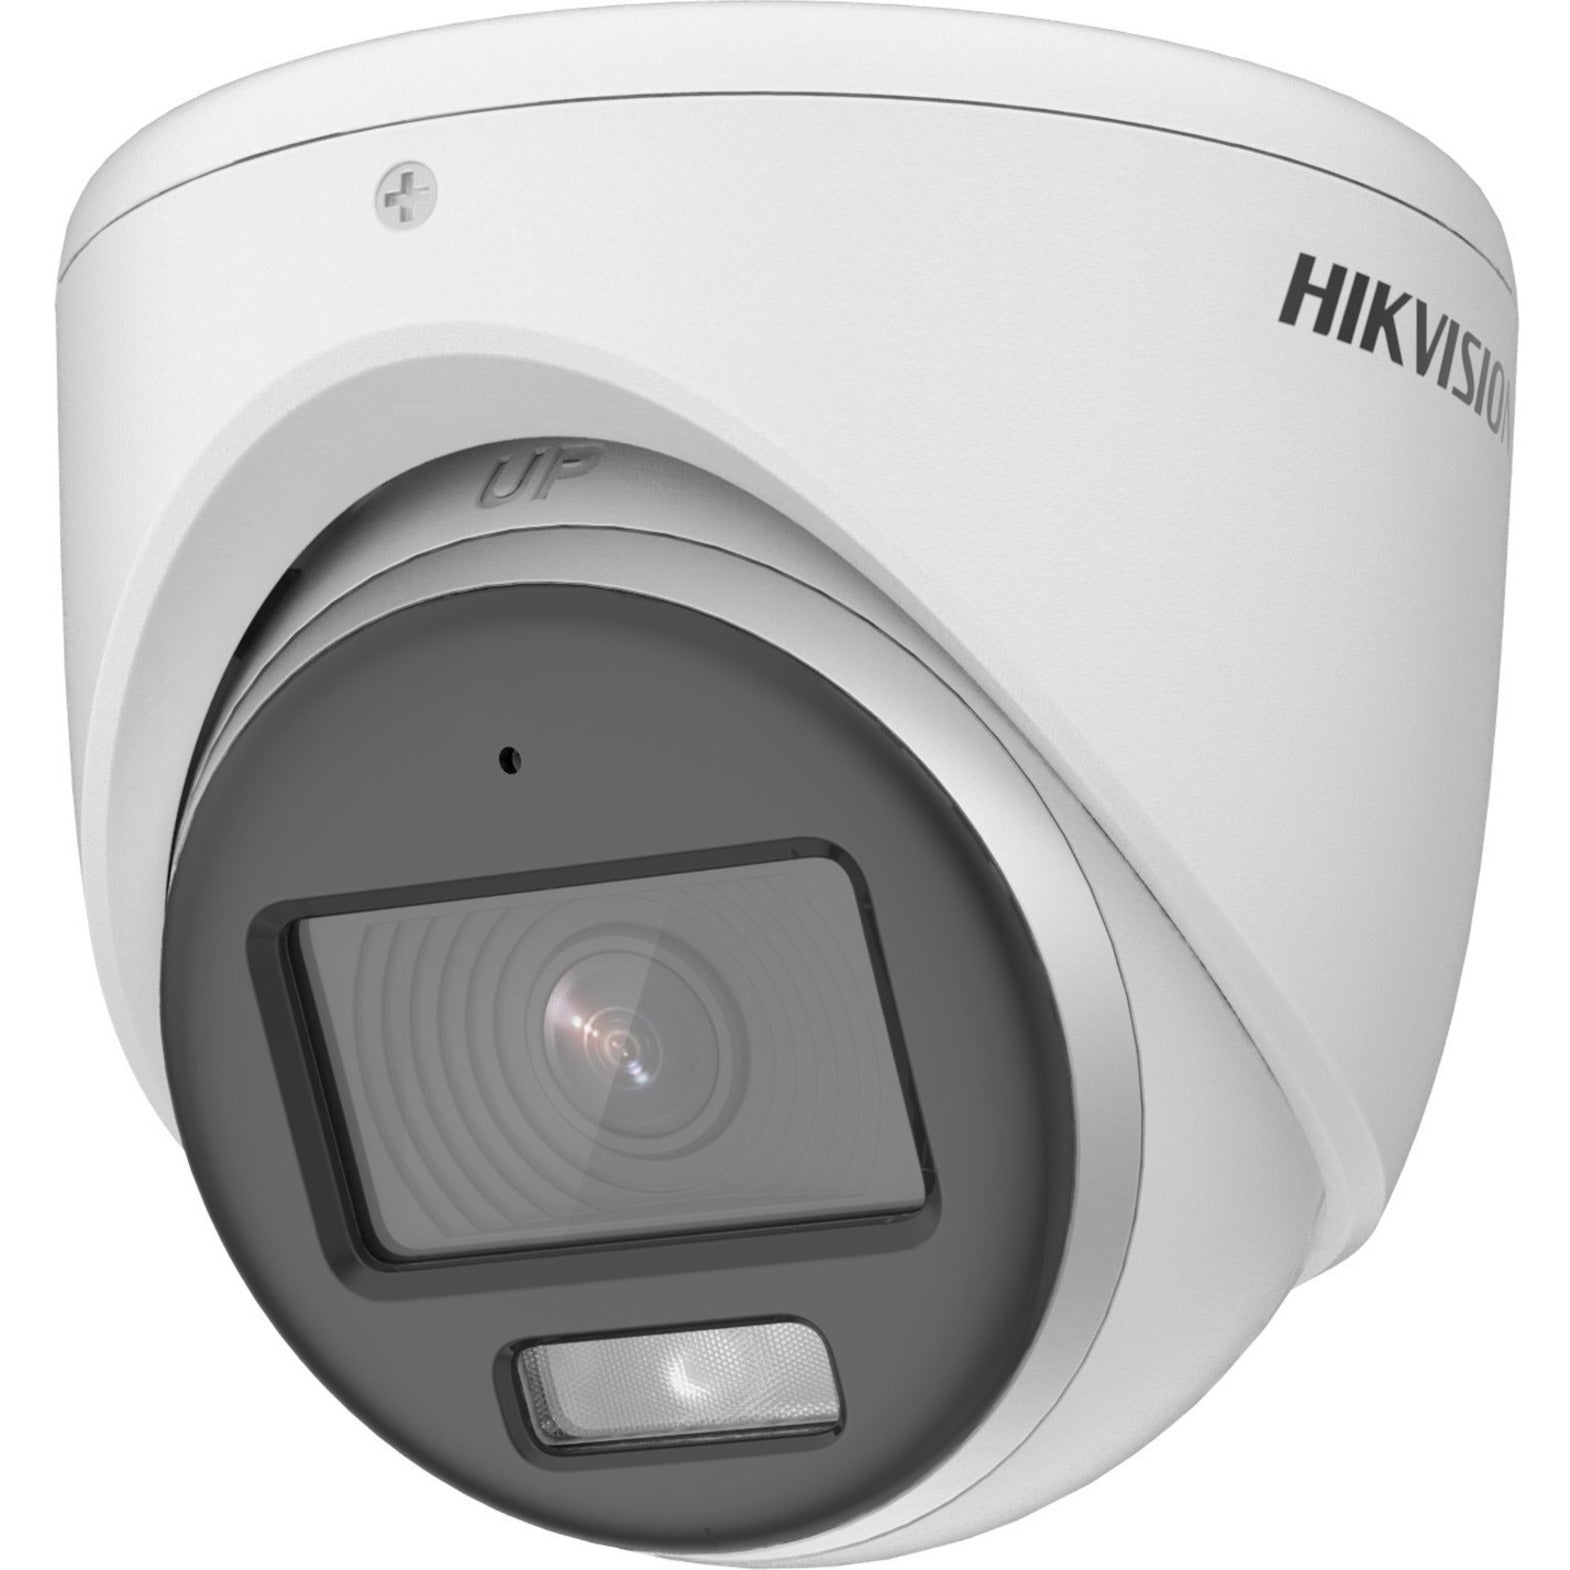 Hikvision DS-2CE70KF0T-MFS 2.8MM 3K ColorVu Audio Fixed Turret Camera, 5MP, IP67, Built-in Microphone